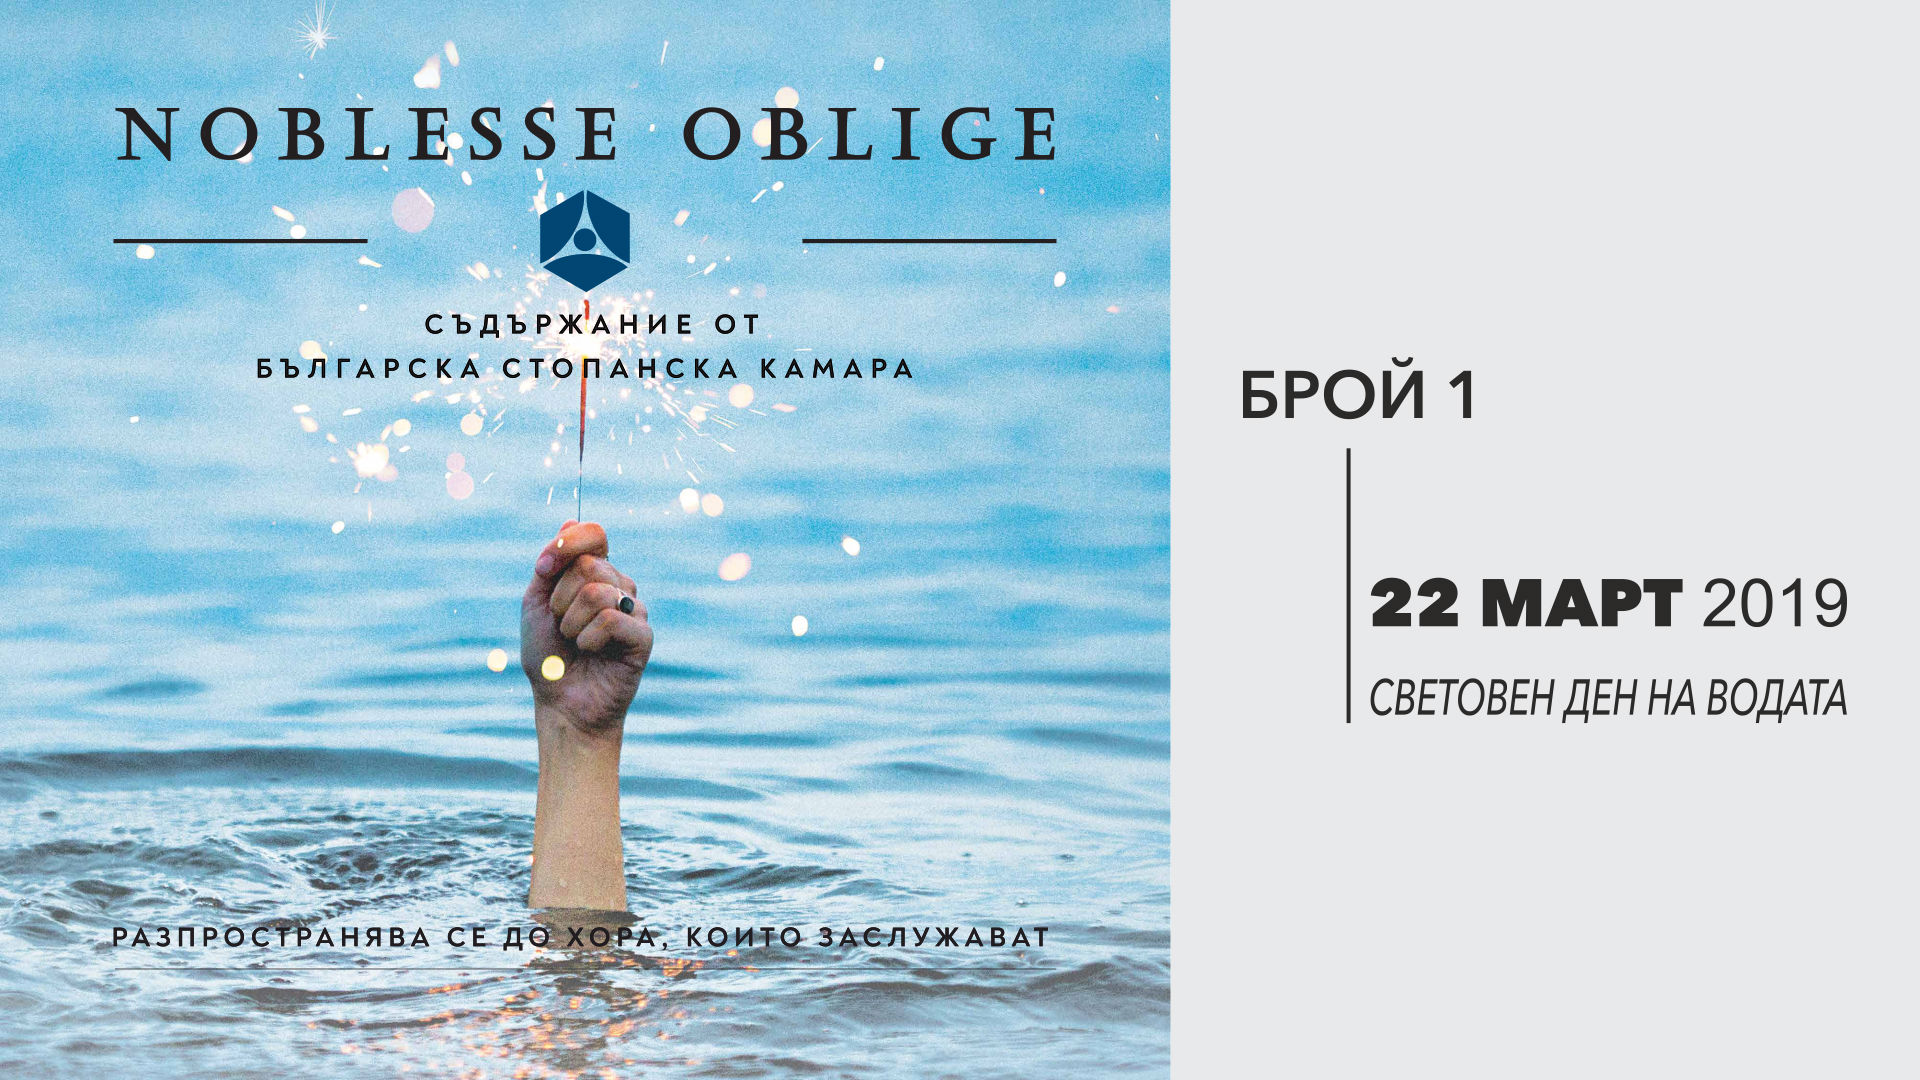 The first issue of “Noblesse Oblige” magazine is here